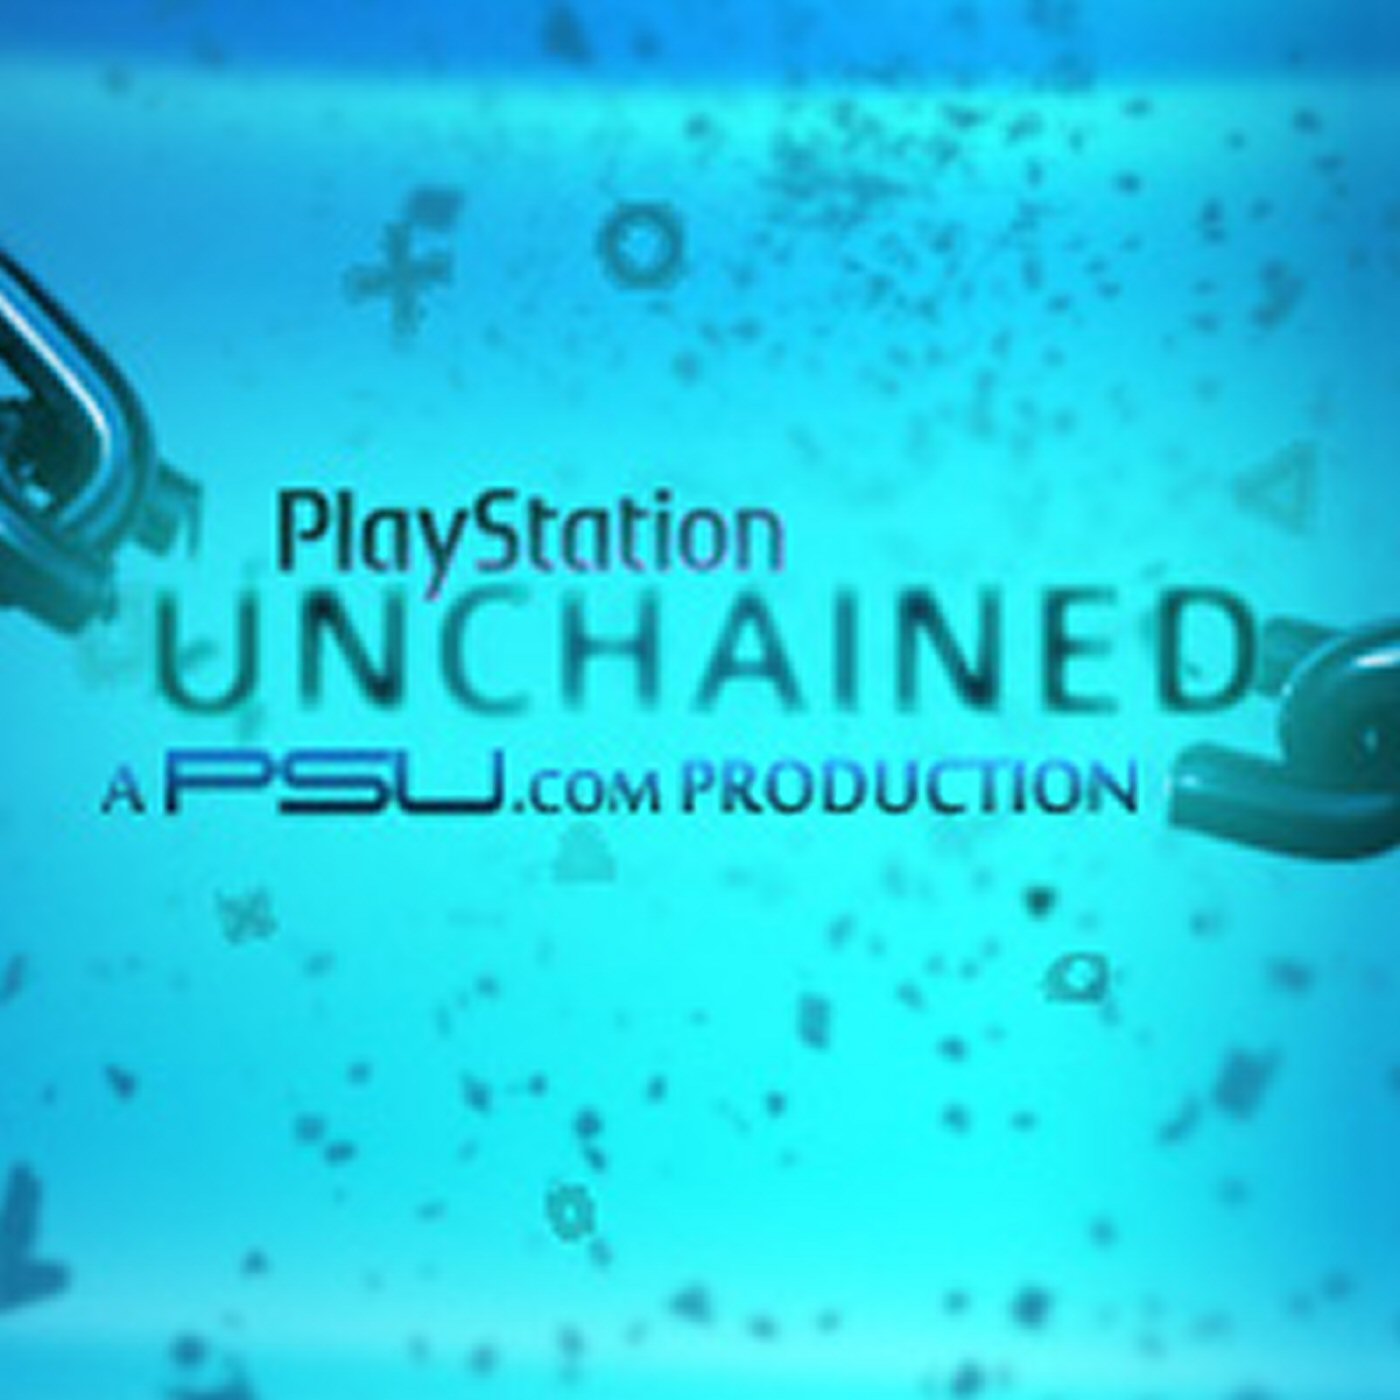 PlayStation Unchained - Episode 22 - News and gossip from the world of PlayStation